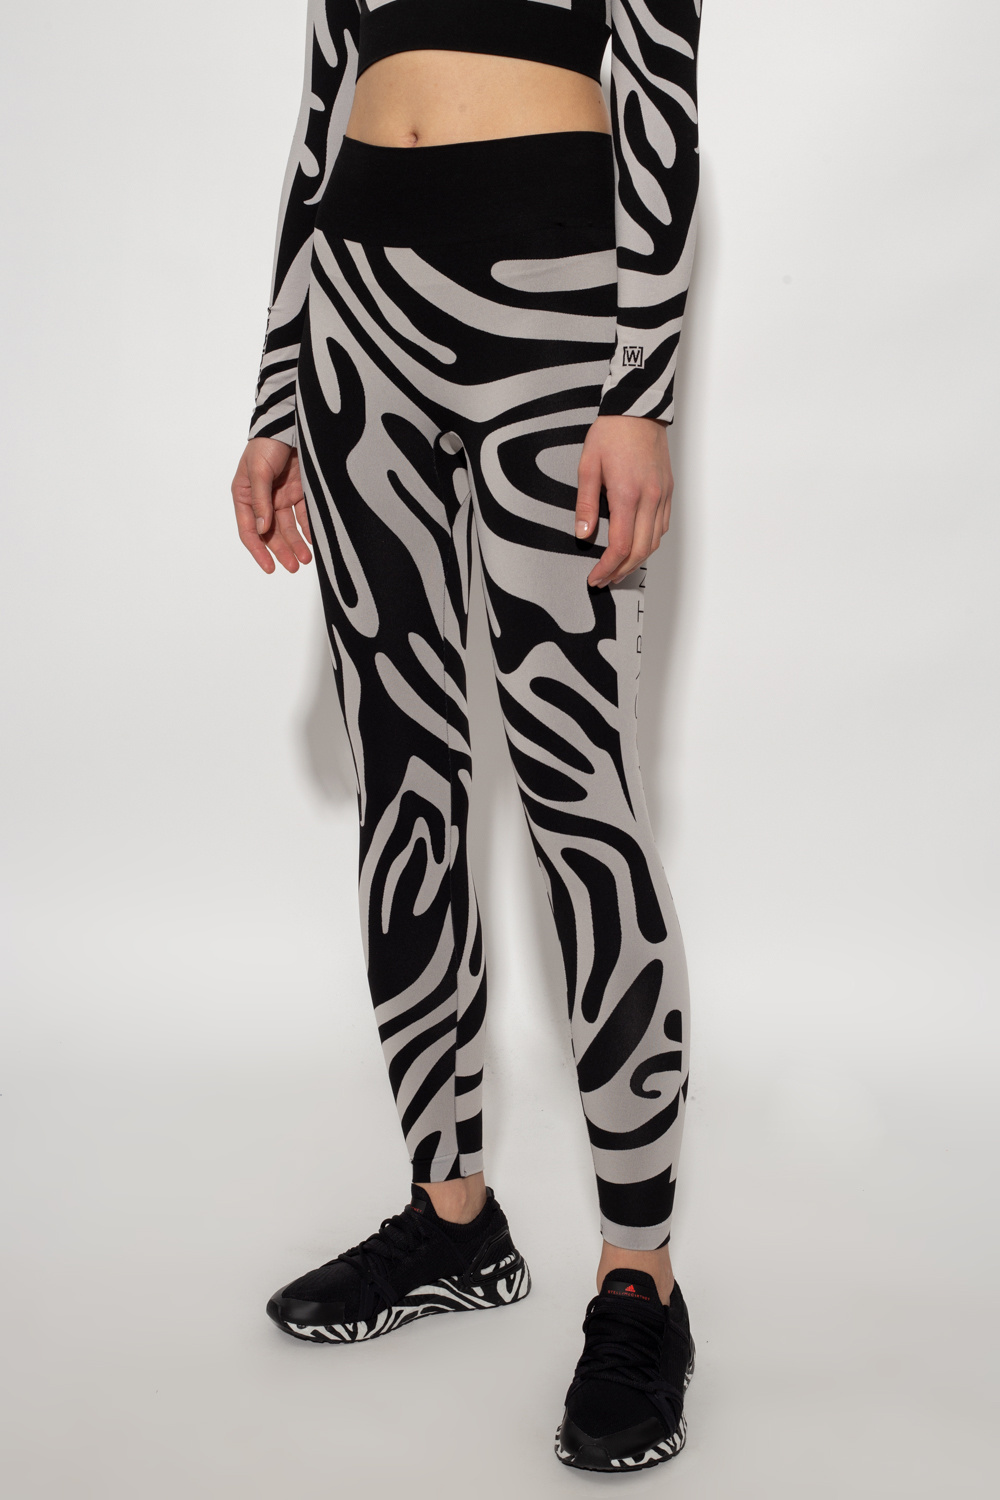 ADIDAS by Stella McCartney ‘Agent of Kindness’ collection leggings